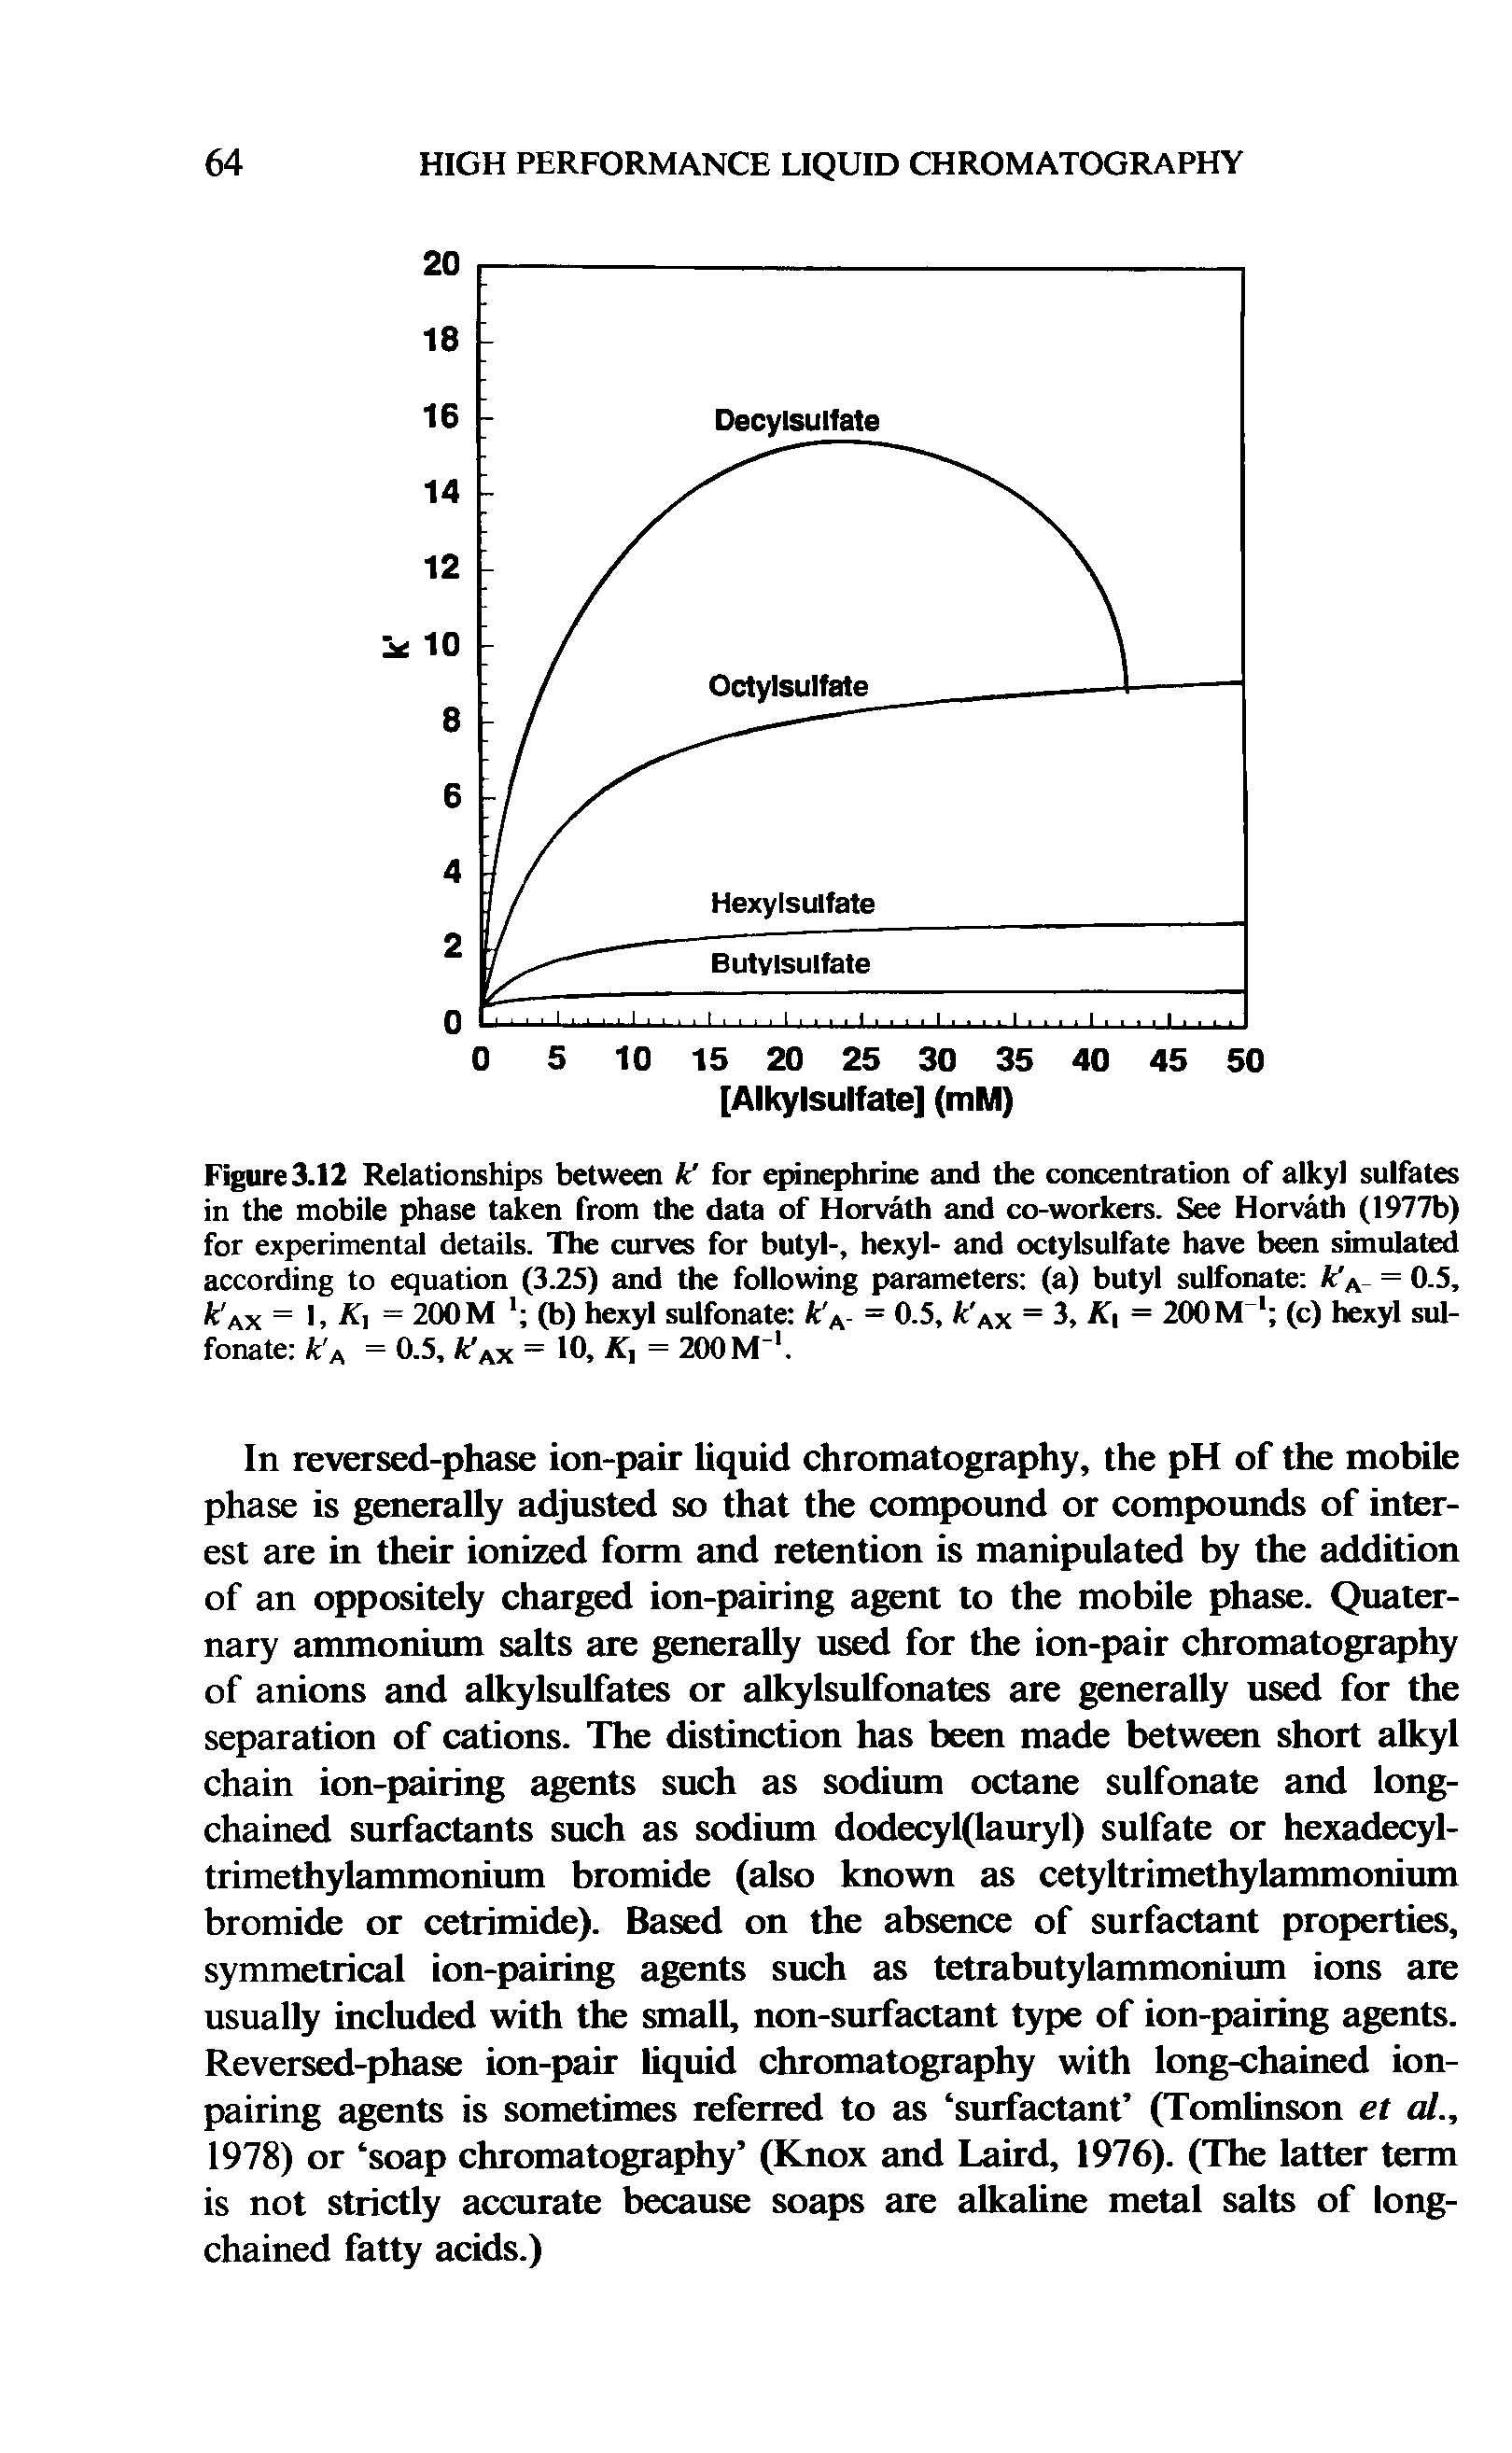 Figure 3.12 Relationships between kf for ejnnephrine and the concentration of alkyl sulfates in the mobile phase taken from the data of Horvath and co-workers. See Horvath (1977b) for experimental details. The curves for butyl-, hexyl- and octylsulfate have been simulated according to equation (3.25) and the following parameters (a) butyl sulfonate = 0.5, k Ax = L 1 = 200 M (b) hexyl sulfonate k - = 0.5, k x = 3, = 200 M (c) hexyl sul-...